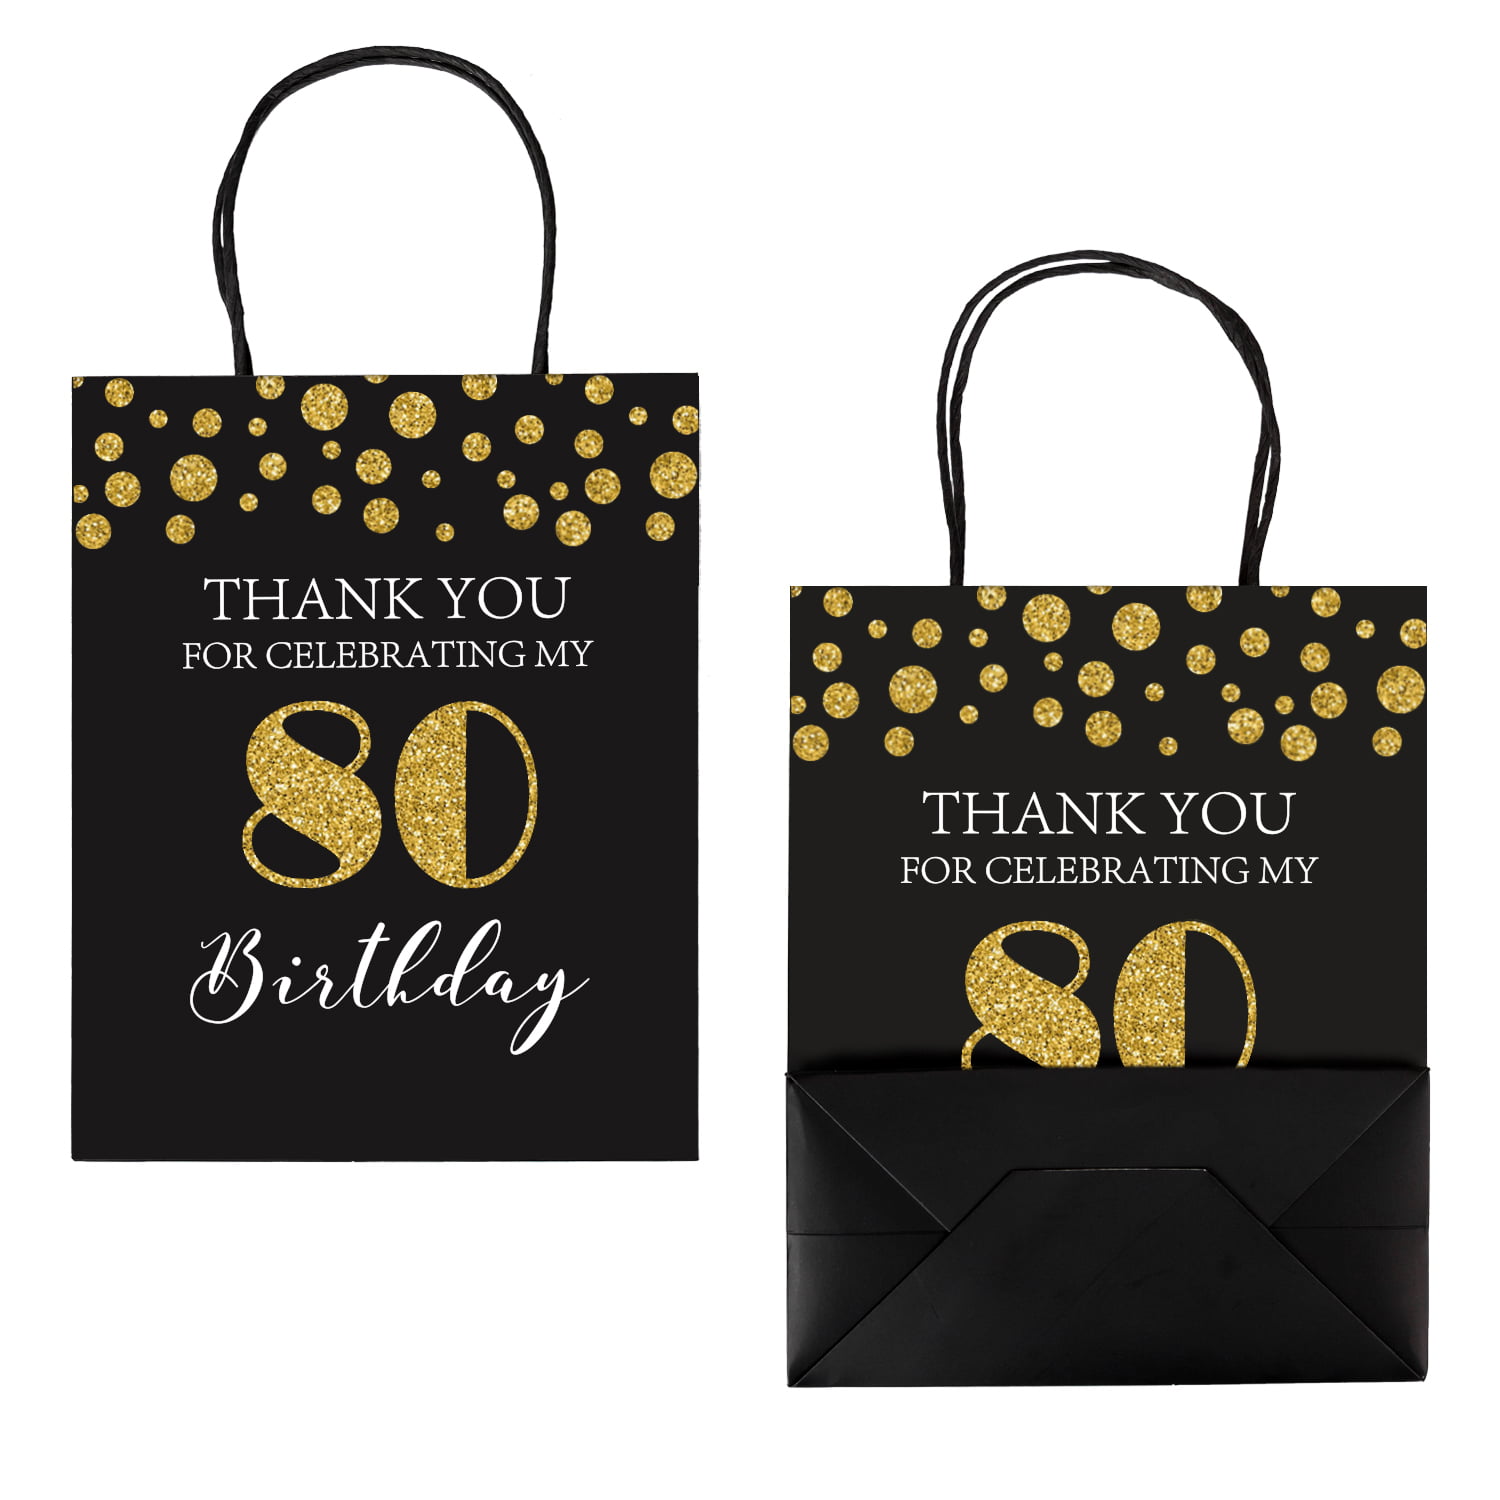 Wedding Party 8 x 4 x 10 Anniversary WRAPAHOLIC Medium Size Gift Bags 12 Pack Cheers to 50 Years Black and Gold Glitter Paper Bags with Gold Tissue Paper for Birthday 